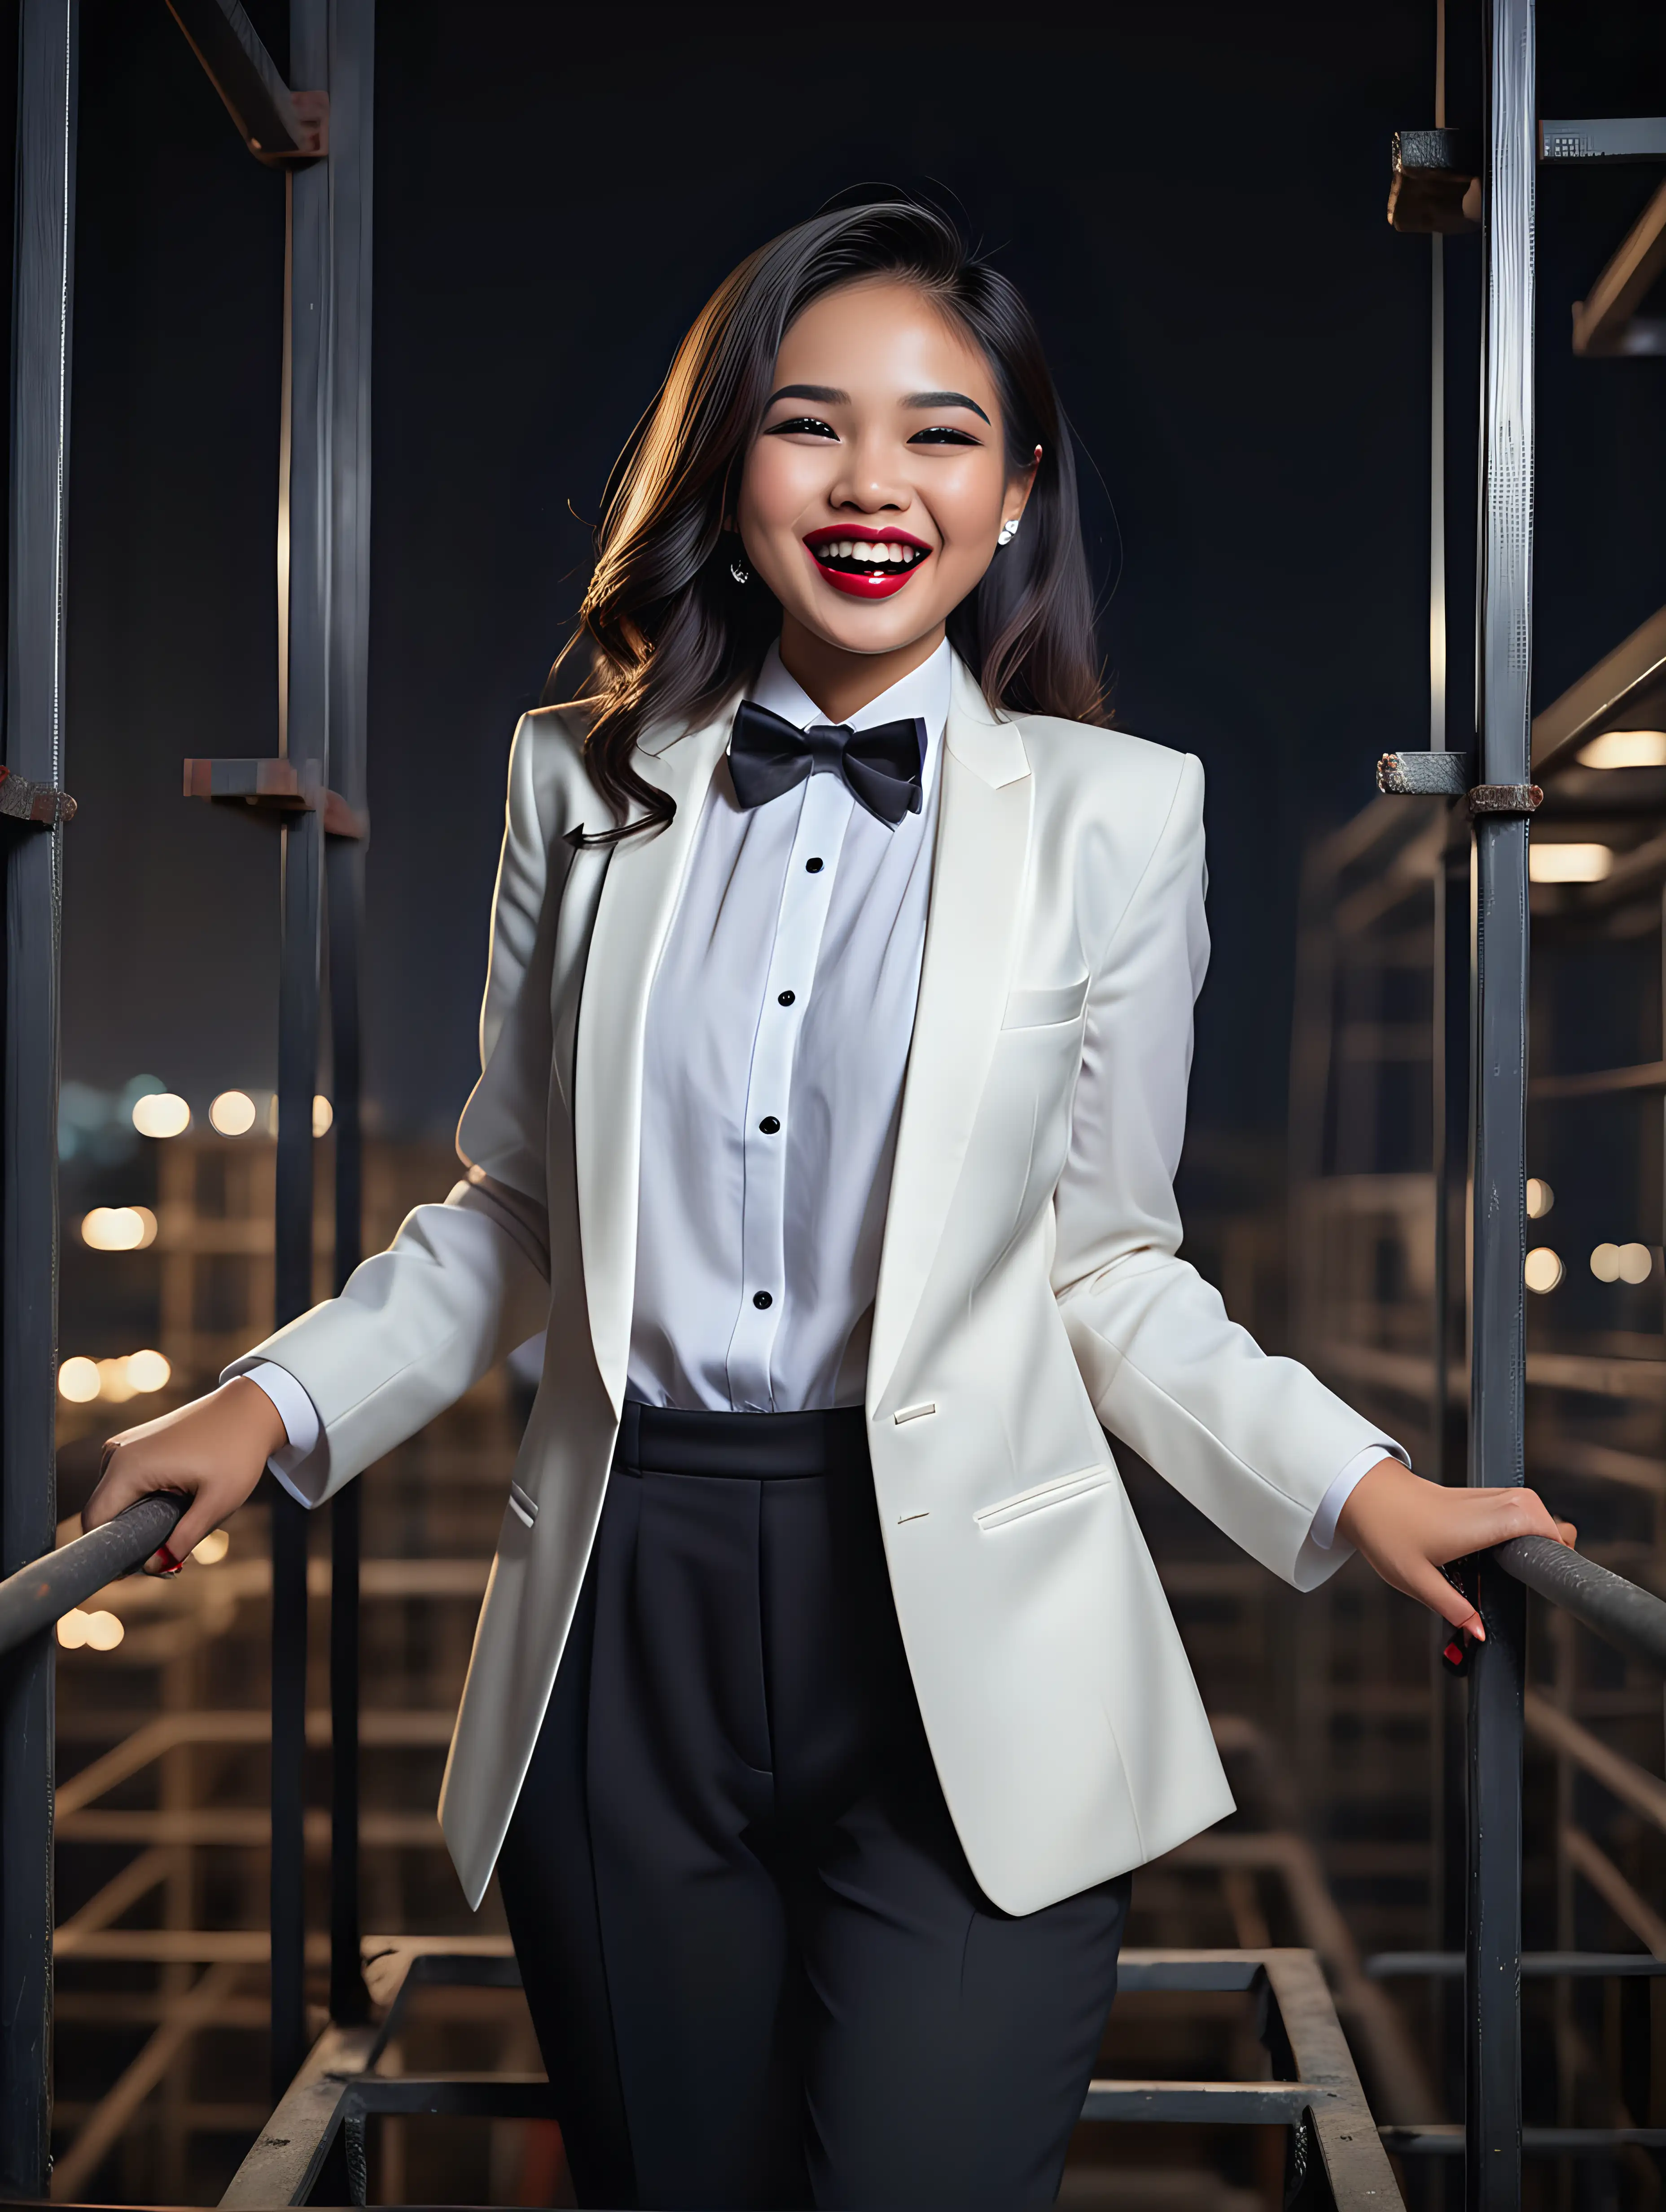 stunning and cute and sophisticated and confident Indonesian woman with shoulder length hair and lipstick wearing a white tuxedo with a white shirt with cufflinks and a (black bow tie) and (black pants), standing on a scaffold facing forward, laughing and smiling.  She is relaxed. It is night.